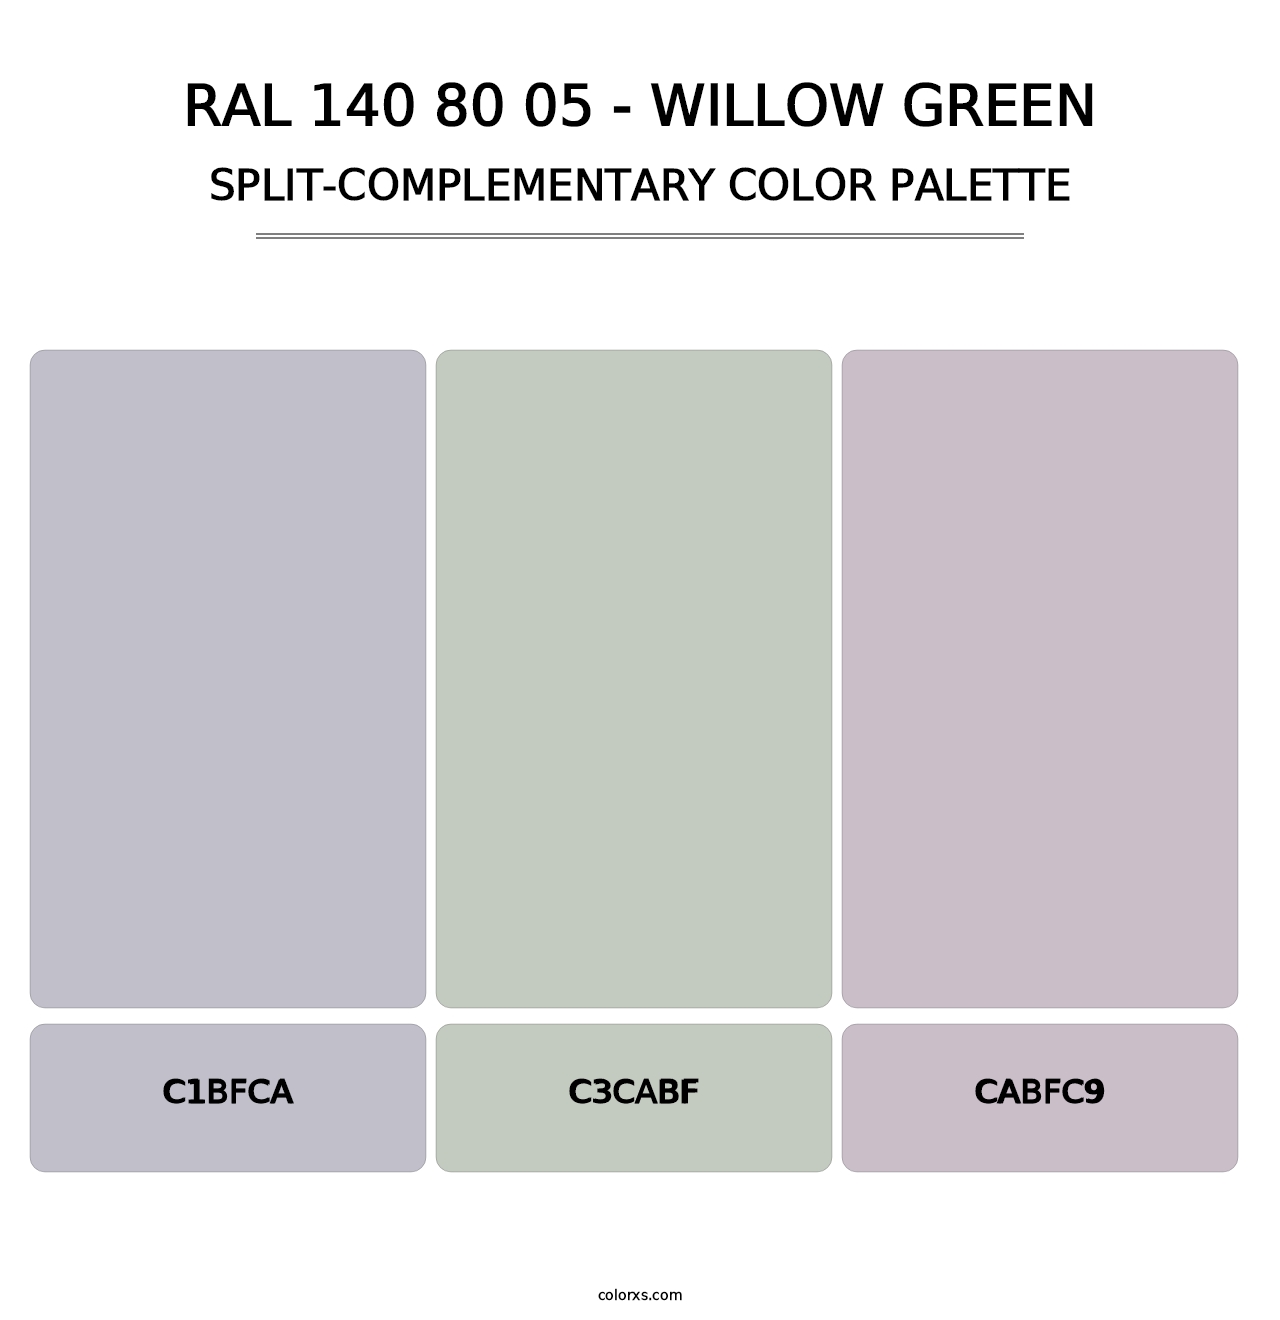 RAL 140 80 05 - Willow Green - Split-Complementary Color Palette